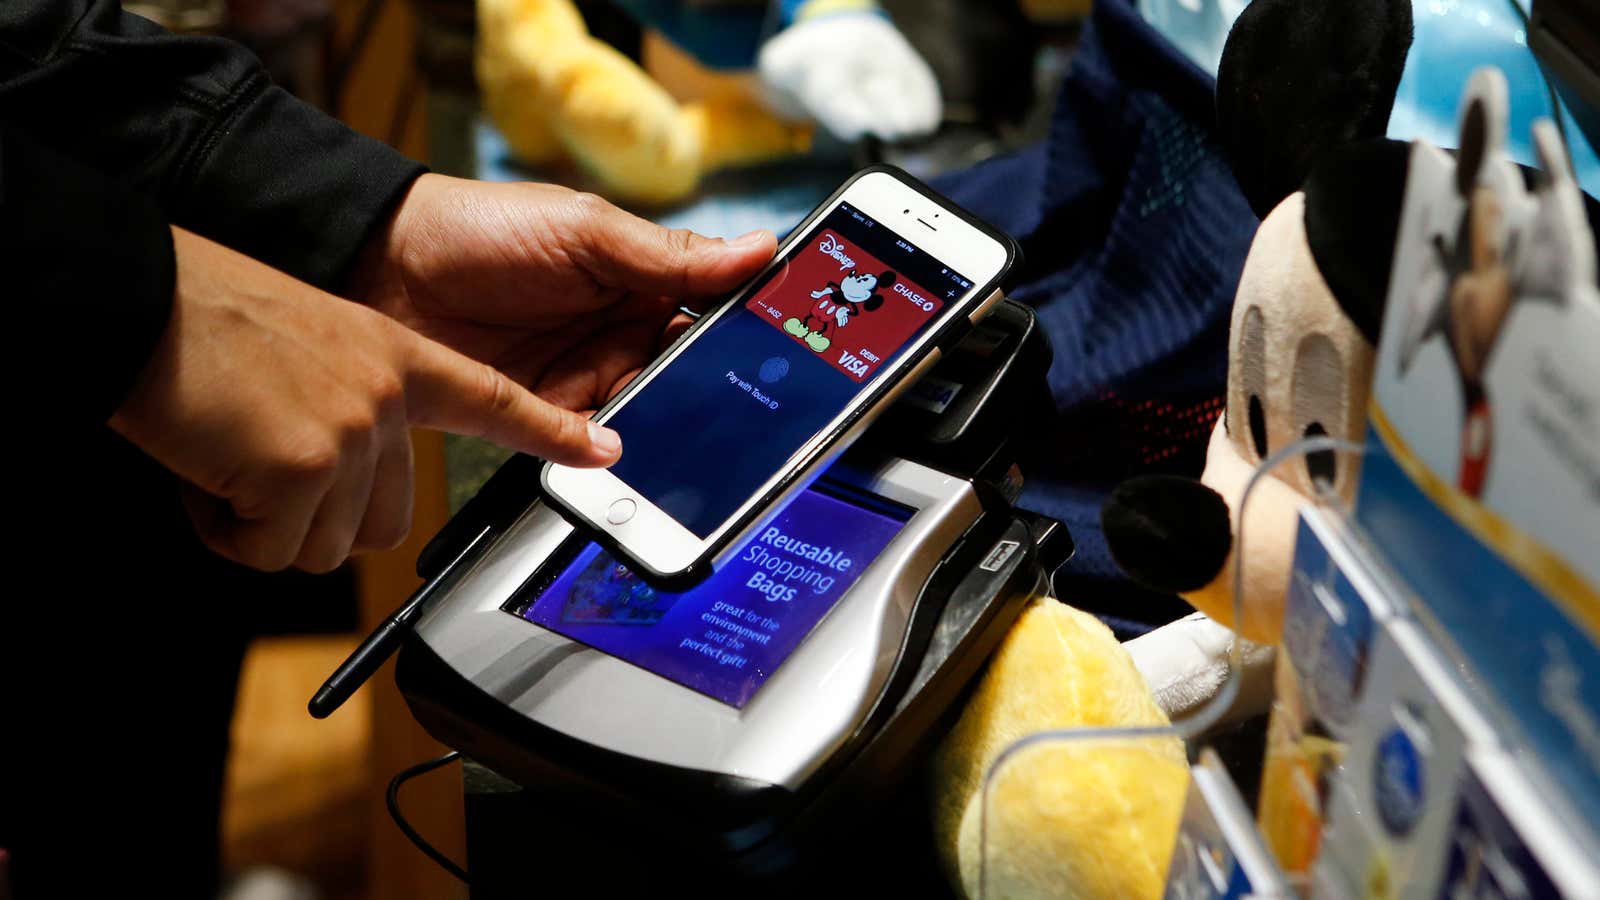 Shoppers are still uncertain about Apple Pay.